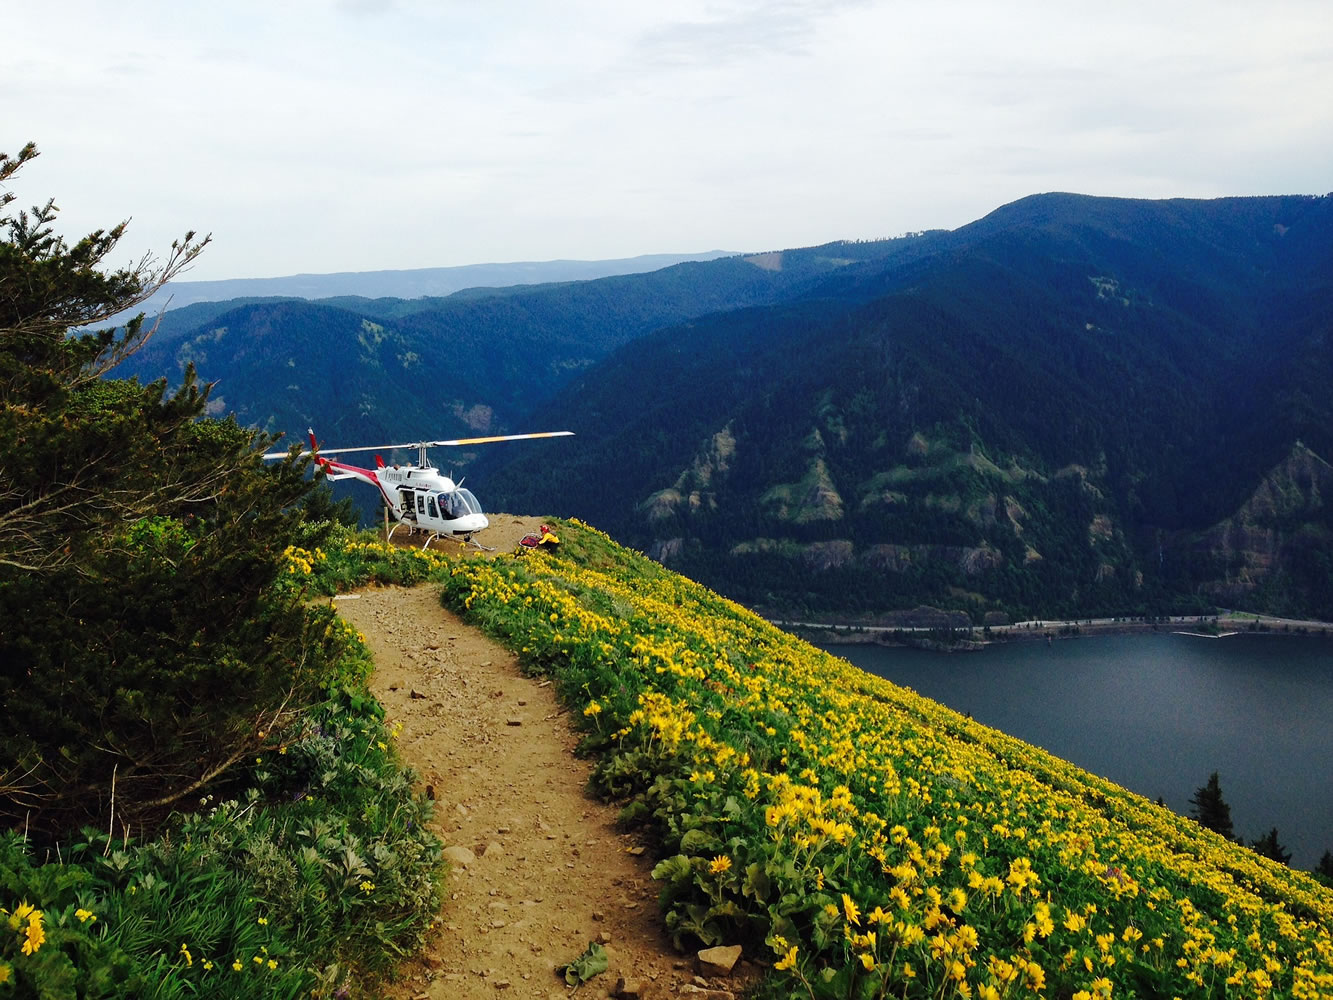 Emergency crews have been called to four emergencies in the past two weekends near Dog Mountain Trail.